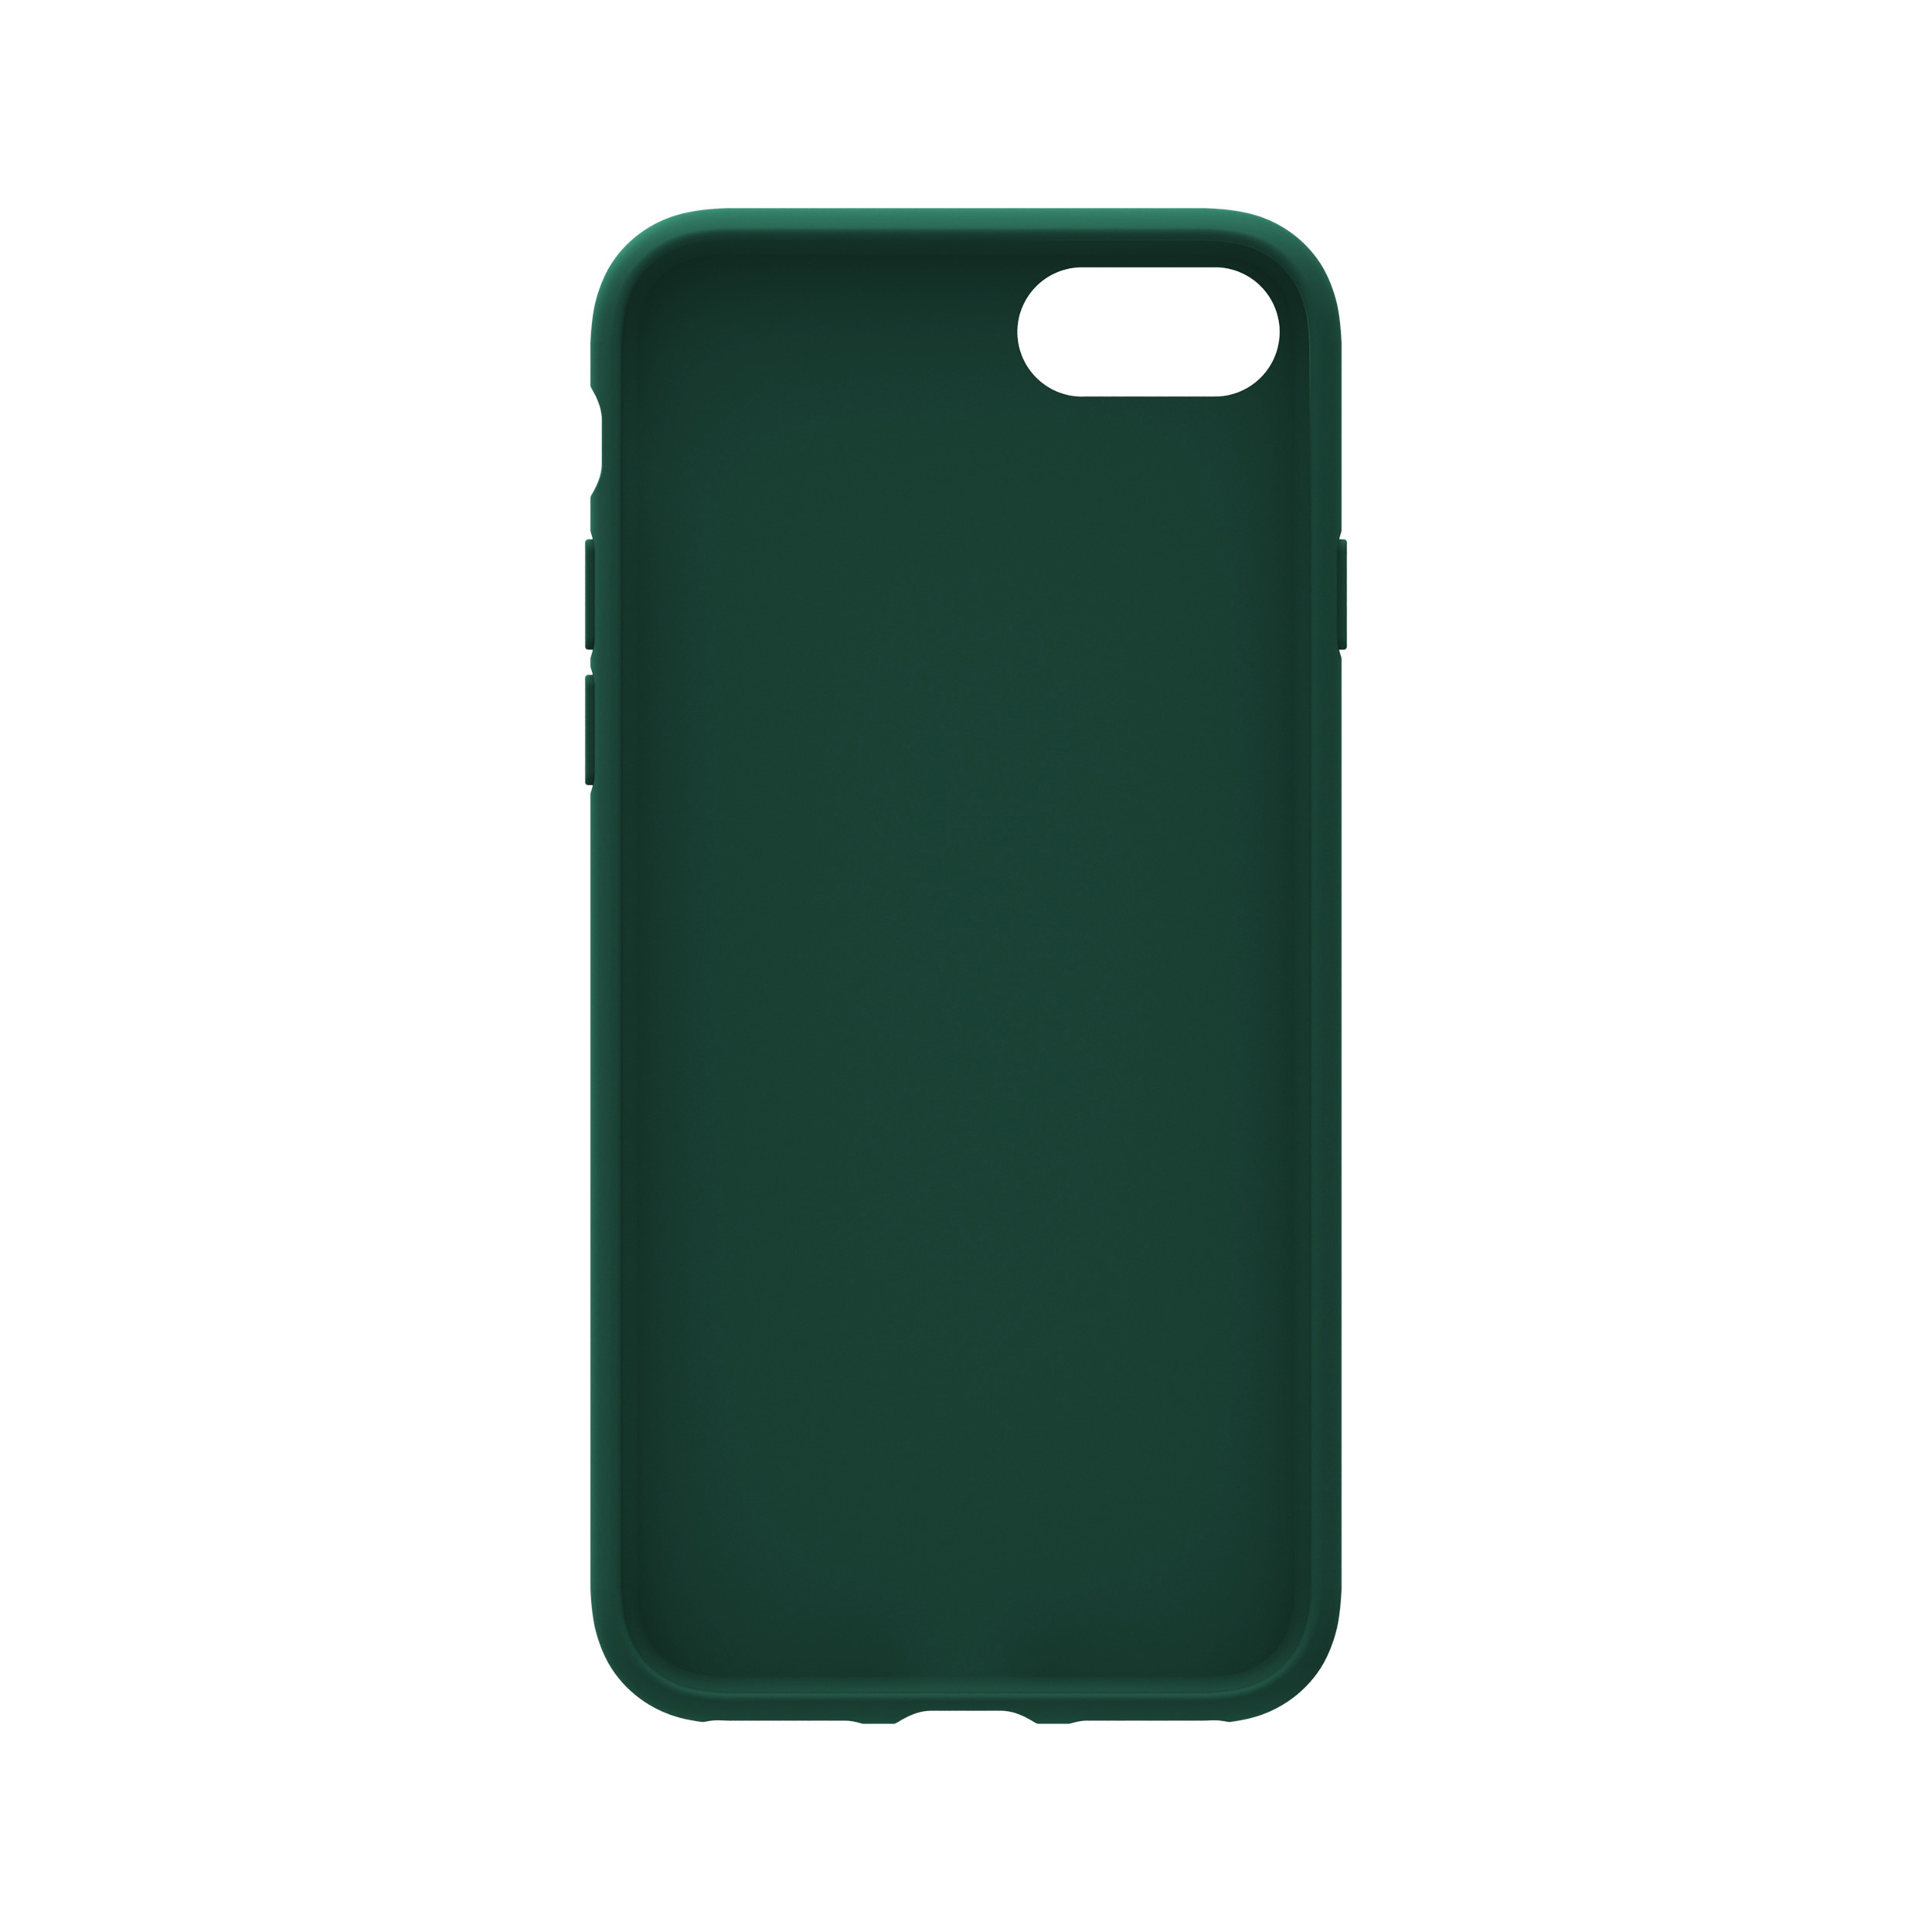 8 8, ADIDAS 29934 Grün 7, iPhone IP iPhone Backcover, Apple, CASE 7 MOULDED GREEN, 6 6, ORIGINALS OR iPhone